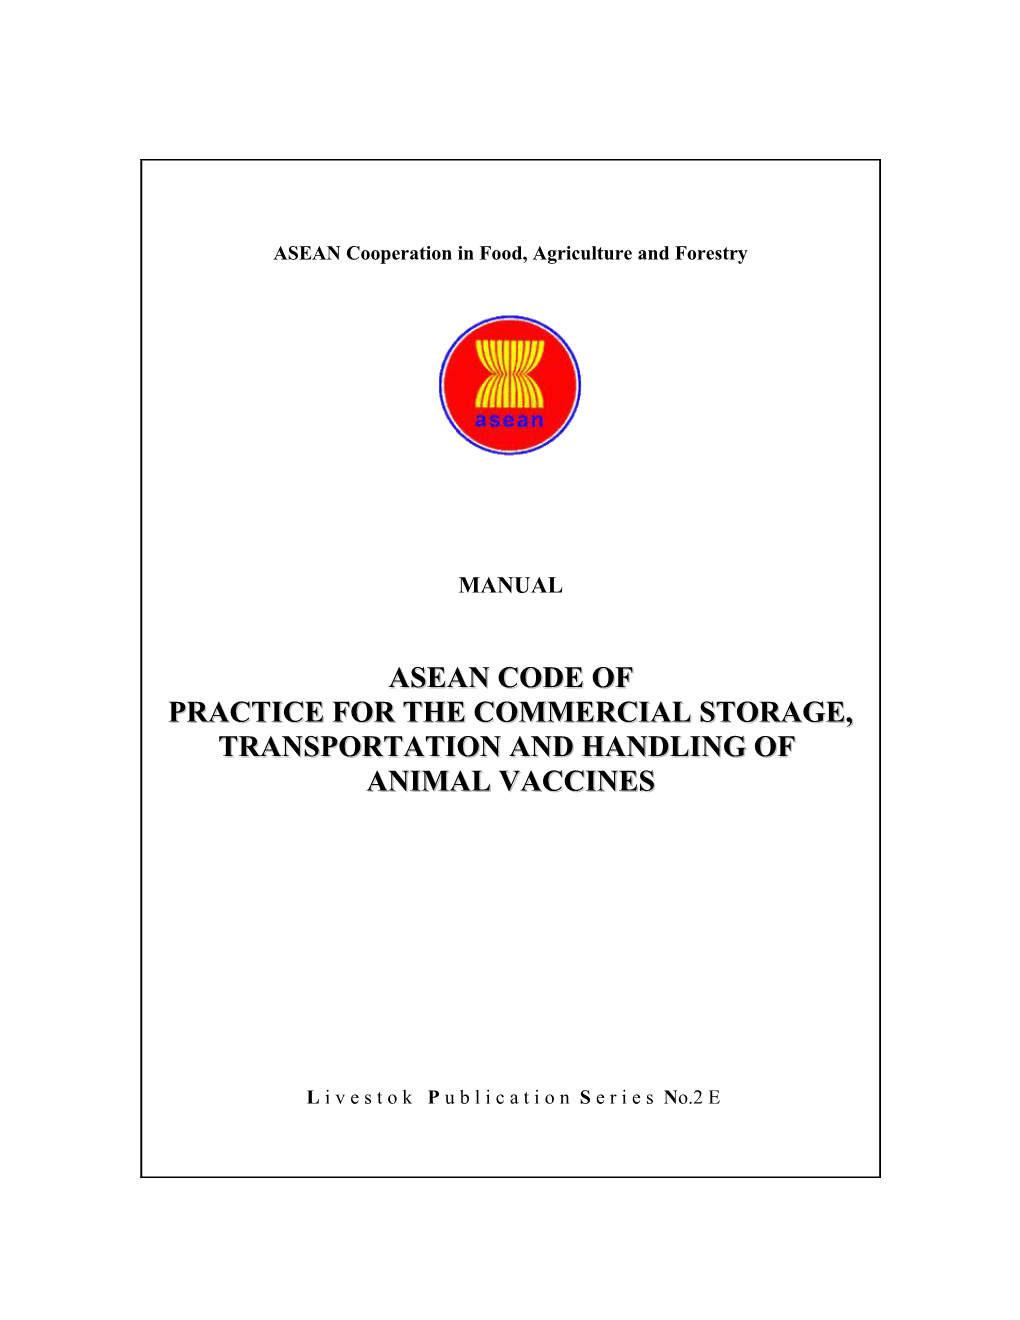 Manual of Asean Code of Practice for the Commercial Storage, Transportation and Handling